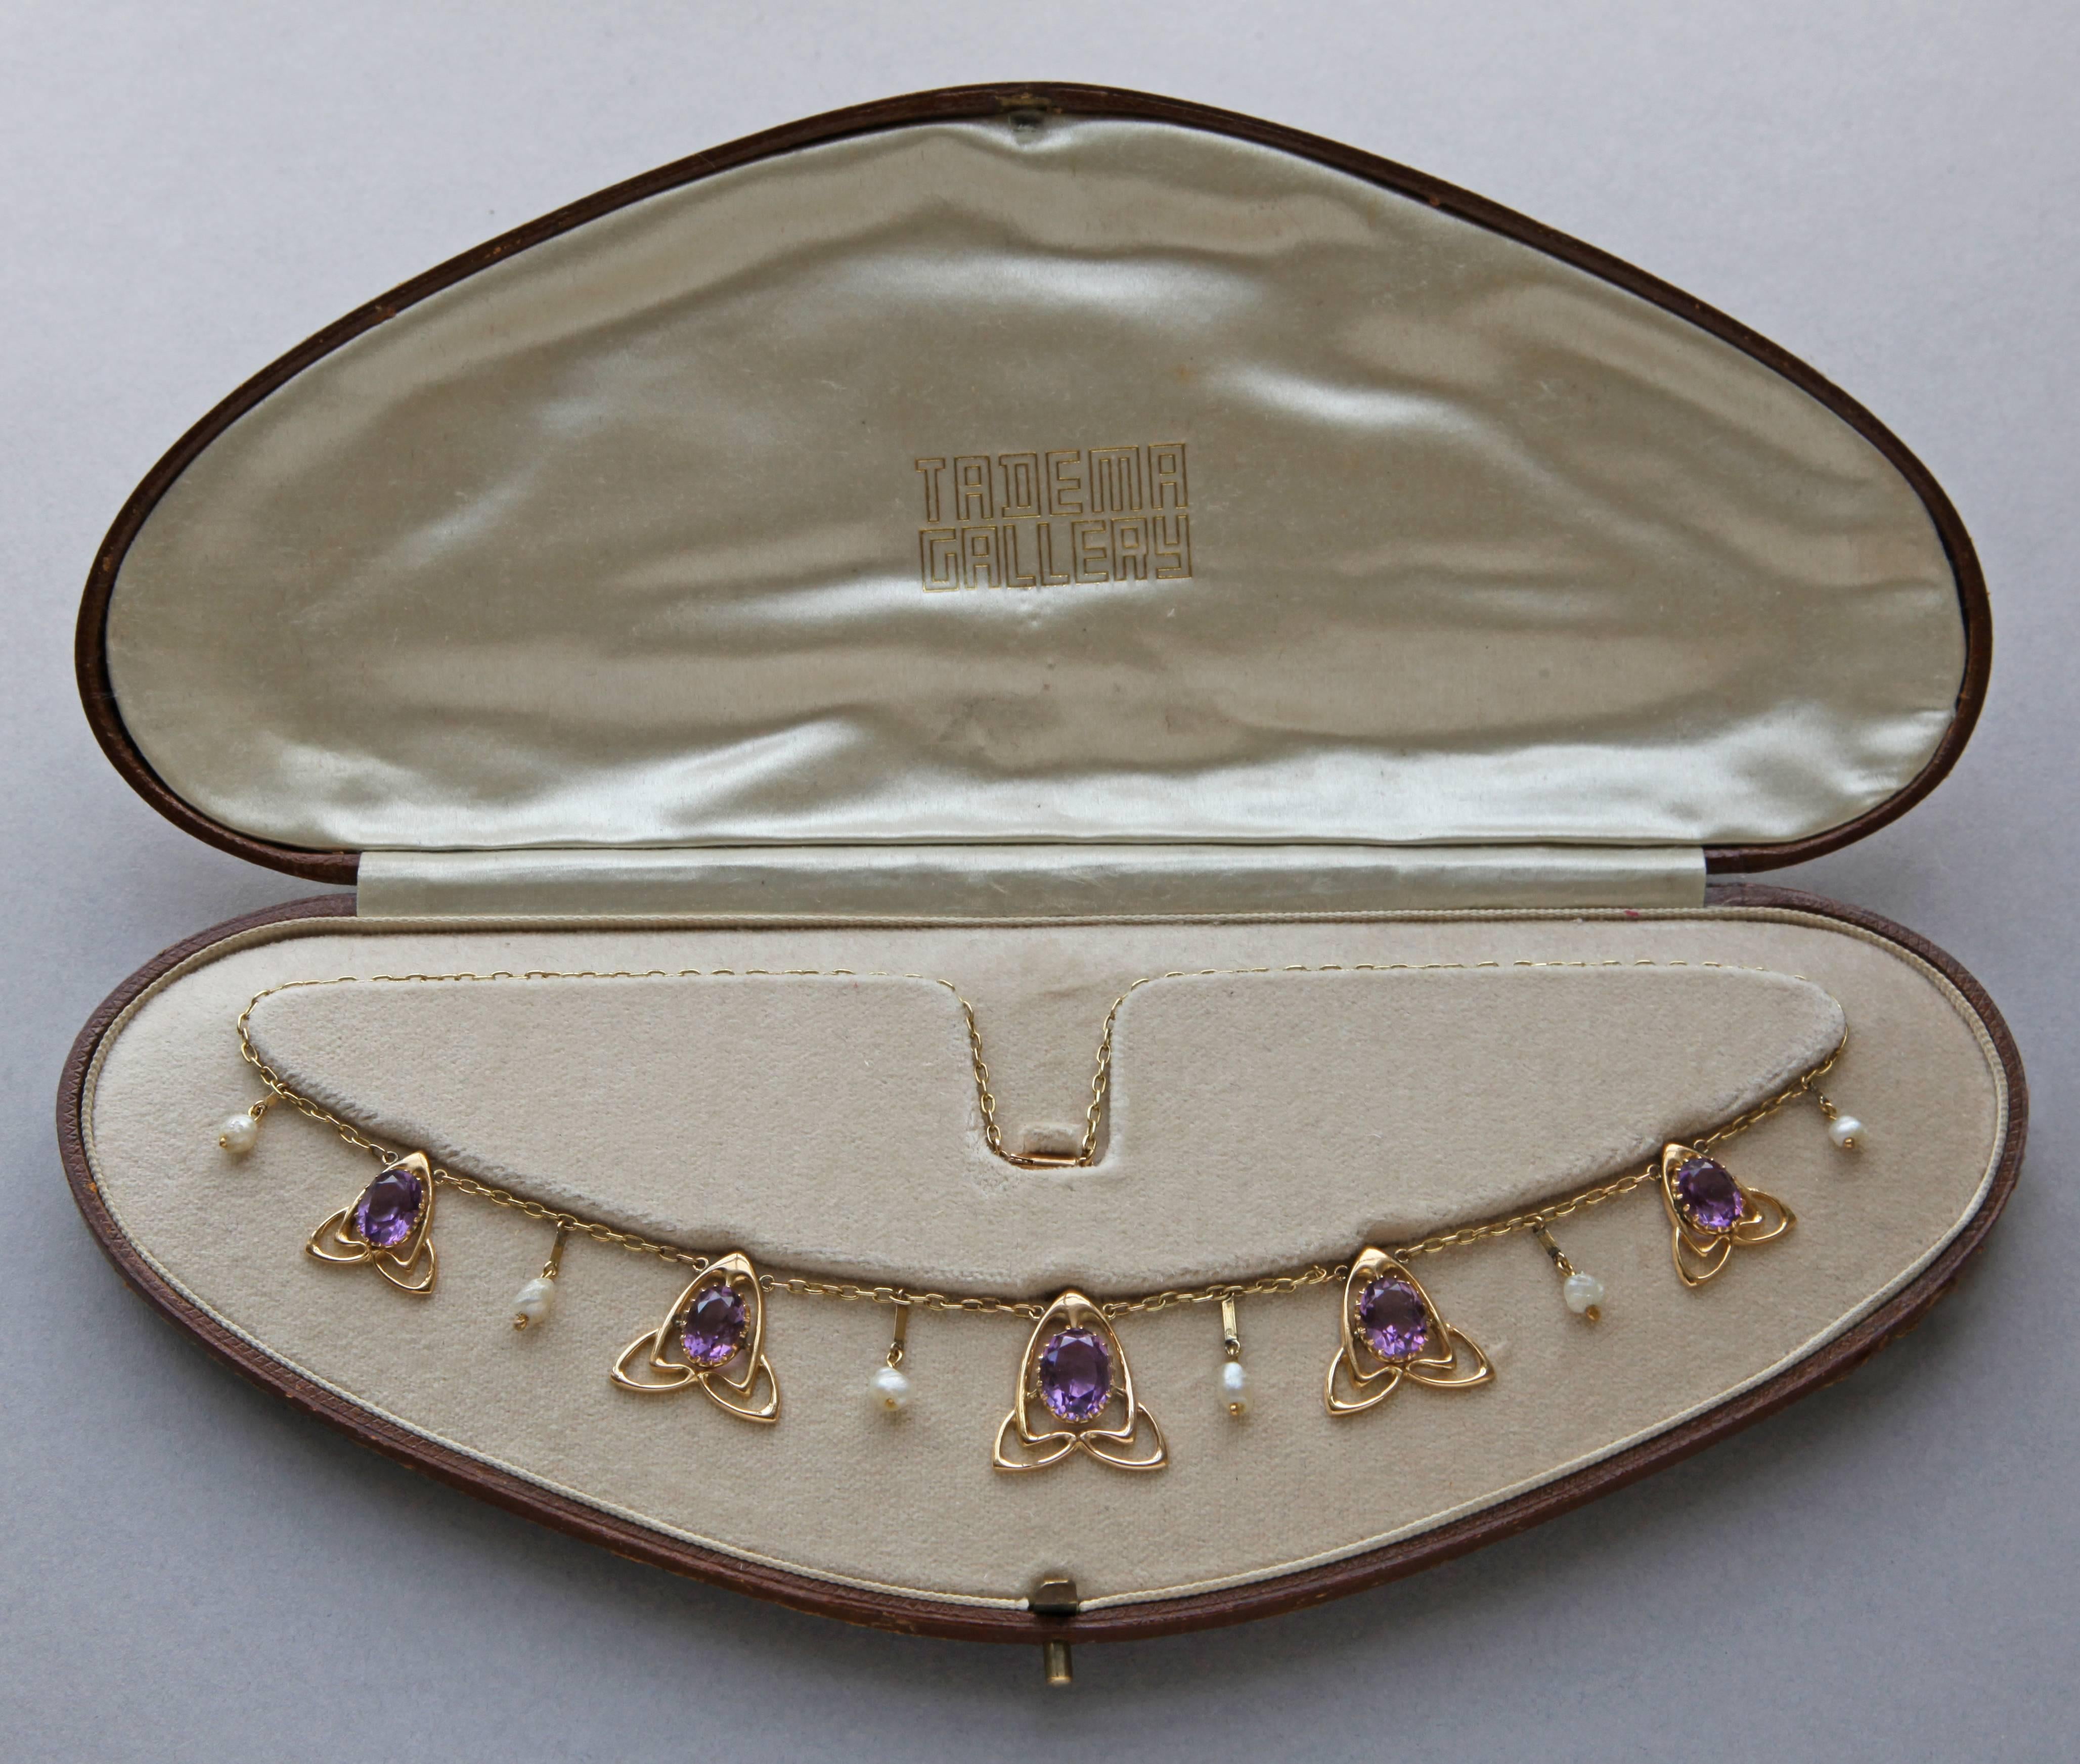 A lovely Liberty & Co Art Nouveau necklace in gold and amethyst designed by Archibald Knox
Documented: cf. Liberty Jewellery sketch book page 216, model number 8167
Archibald Knox, Stephen A. Martin, 2001, page 249. 
Fitted case 